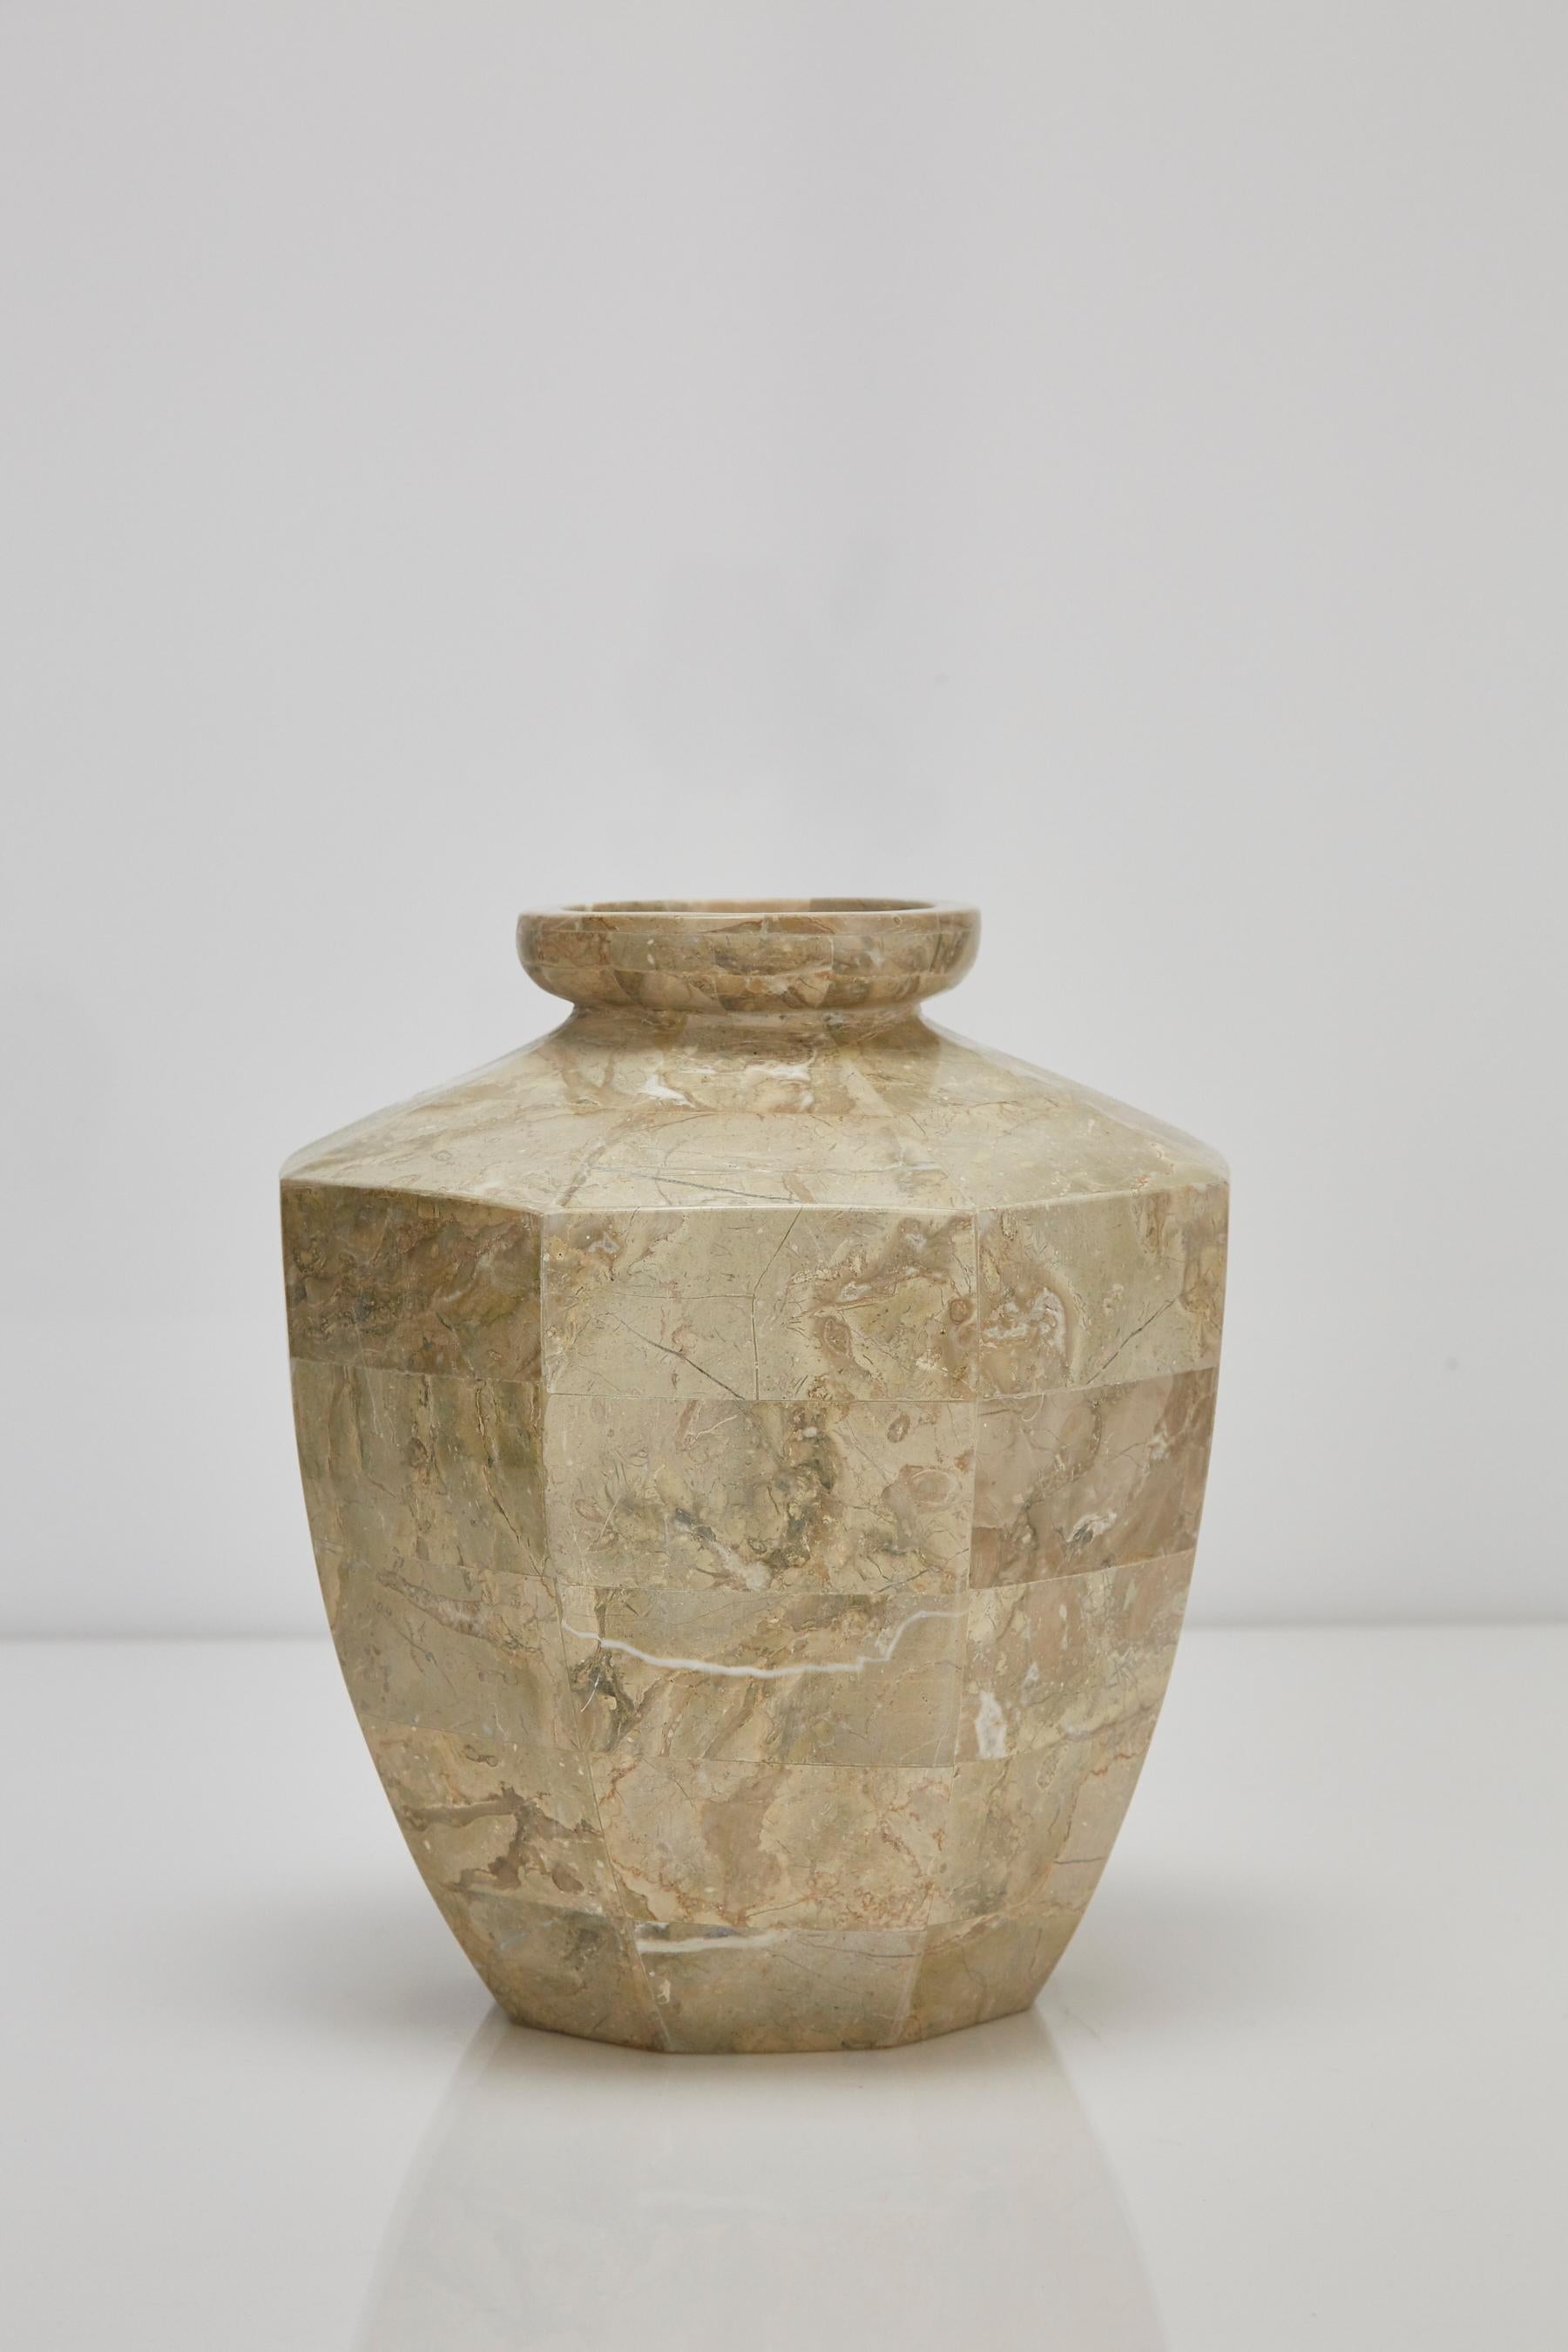 Post-Modern Short Octagonal Vase in Tessellated Cantor Stone, 1990s For Sale